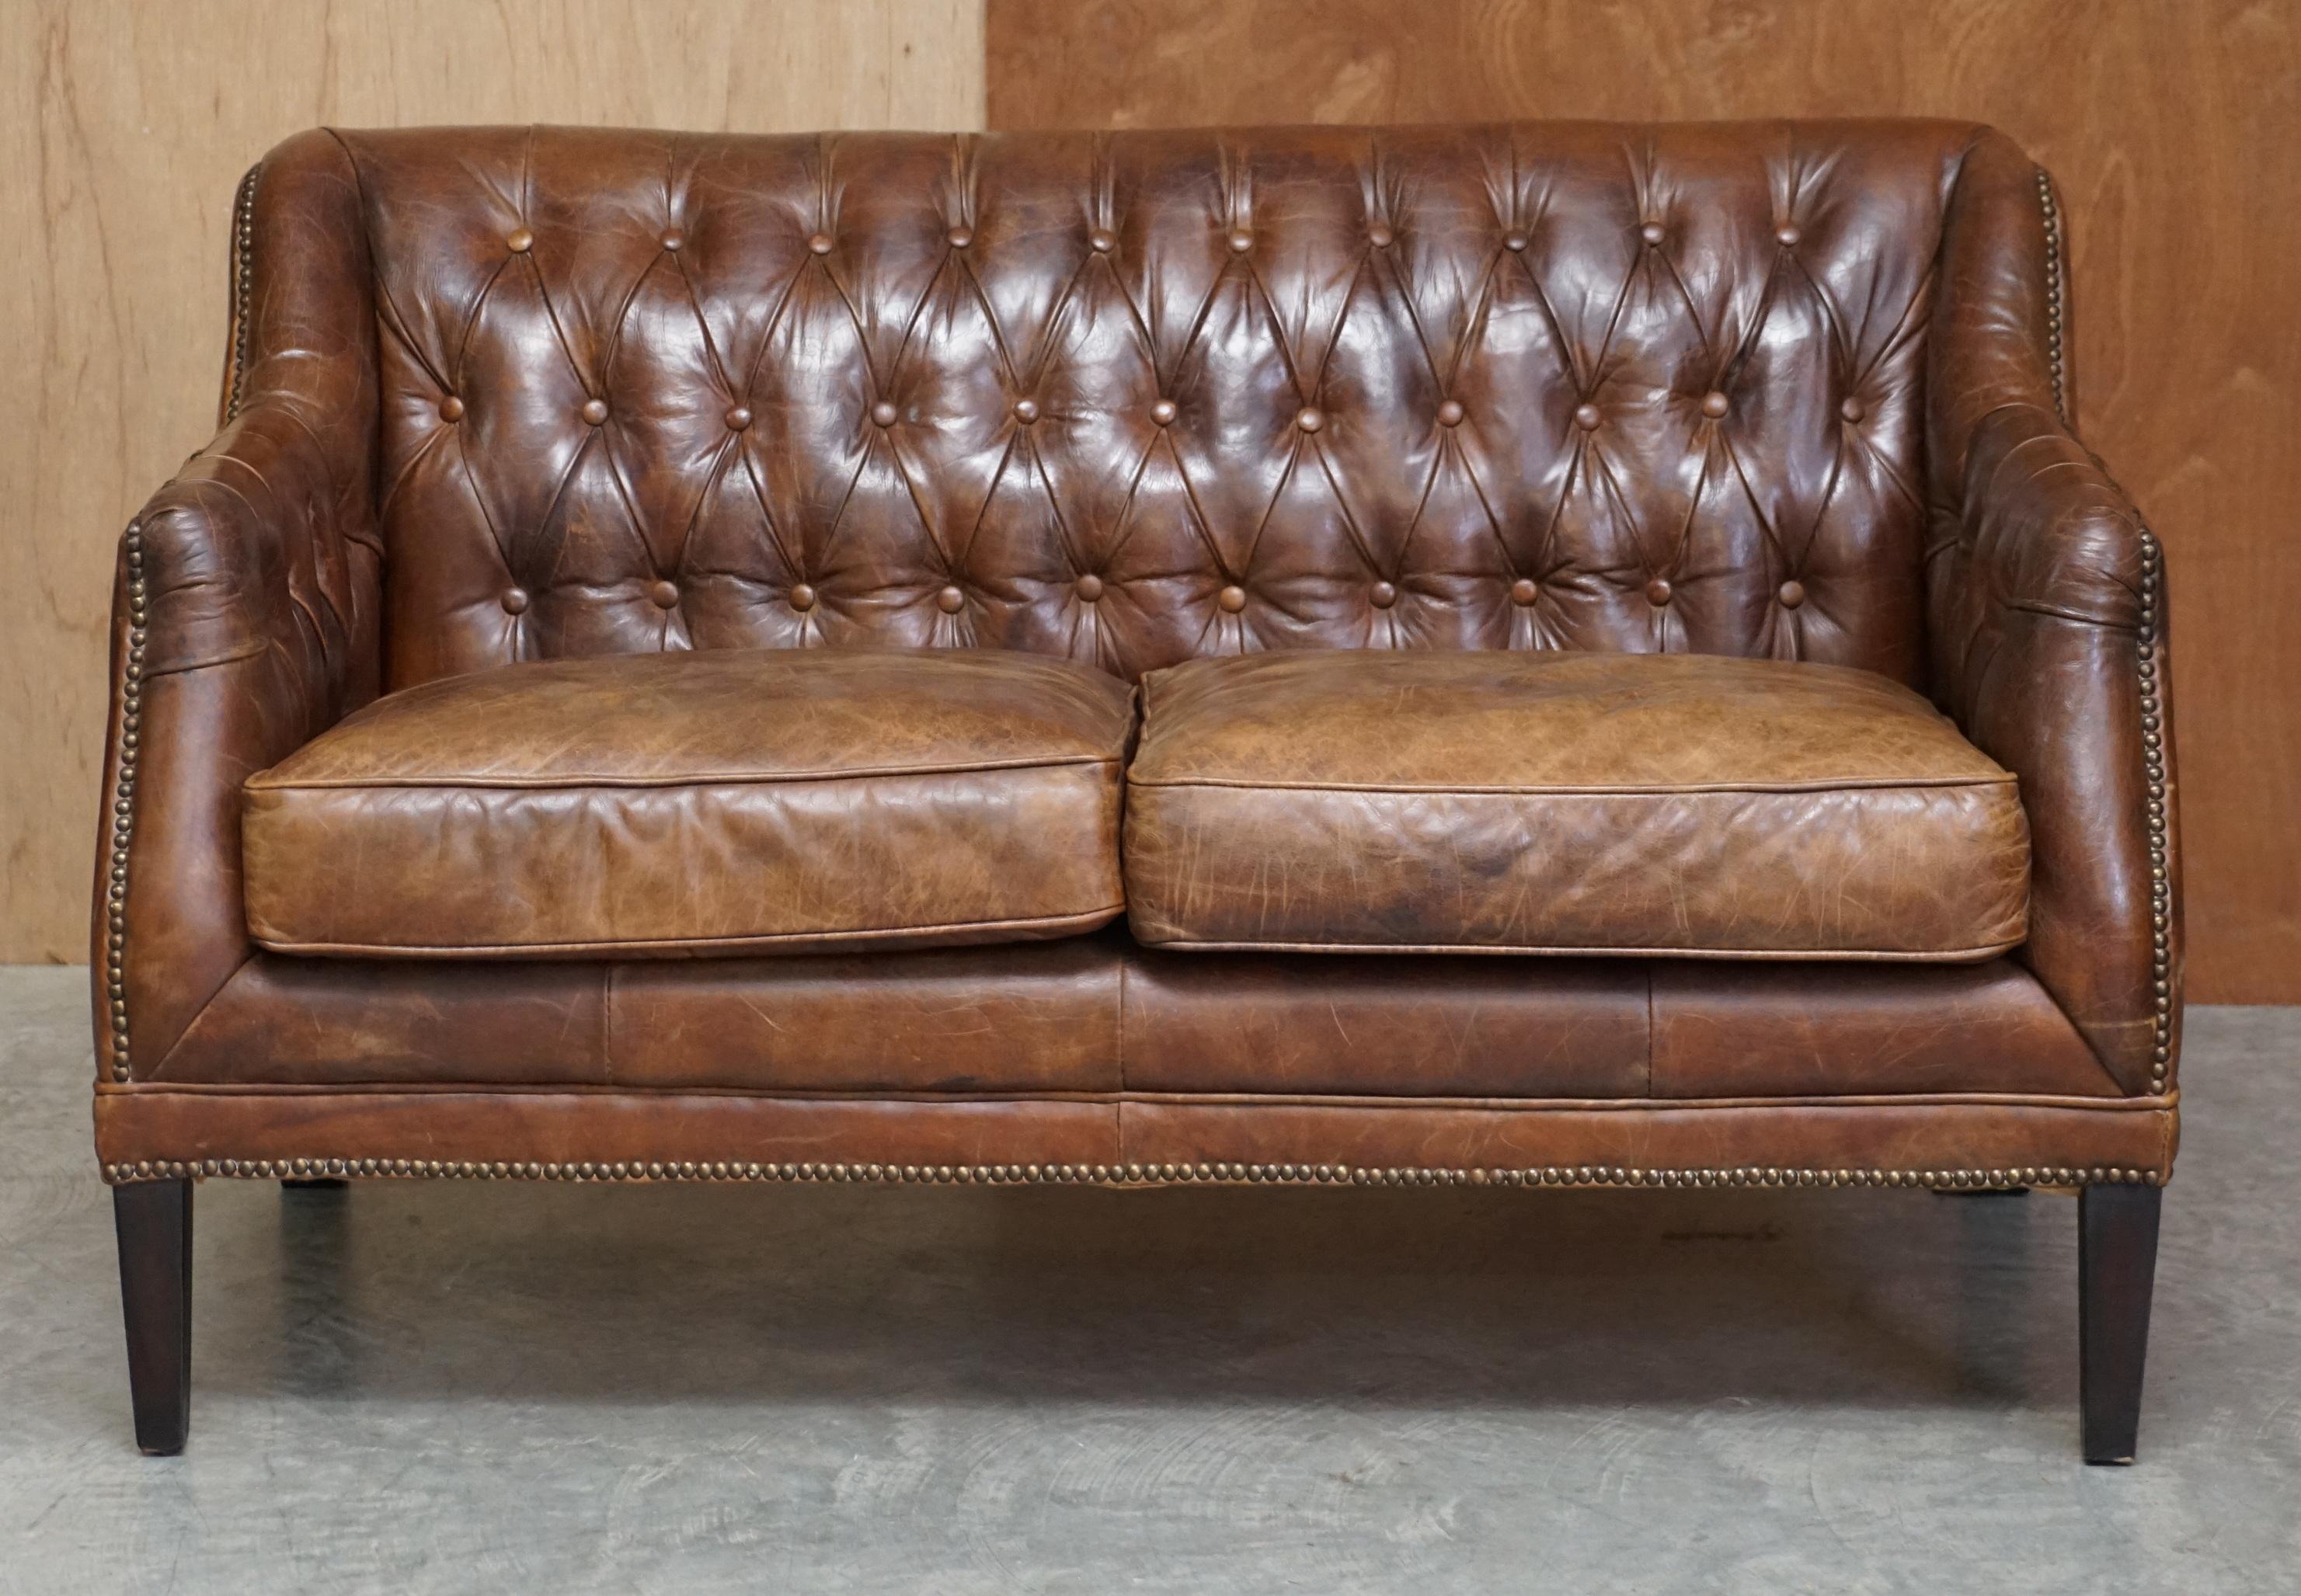 We are delighted to offer for sale this lovely hand dyed aged brown leather Chesterfield sofa

A good looking well made and decorative sofa, it has a heritage upholstery which is aged and vintage from new so looks very Regency. This is a nice